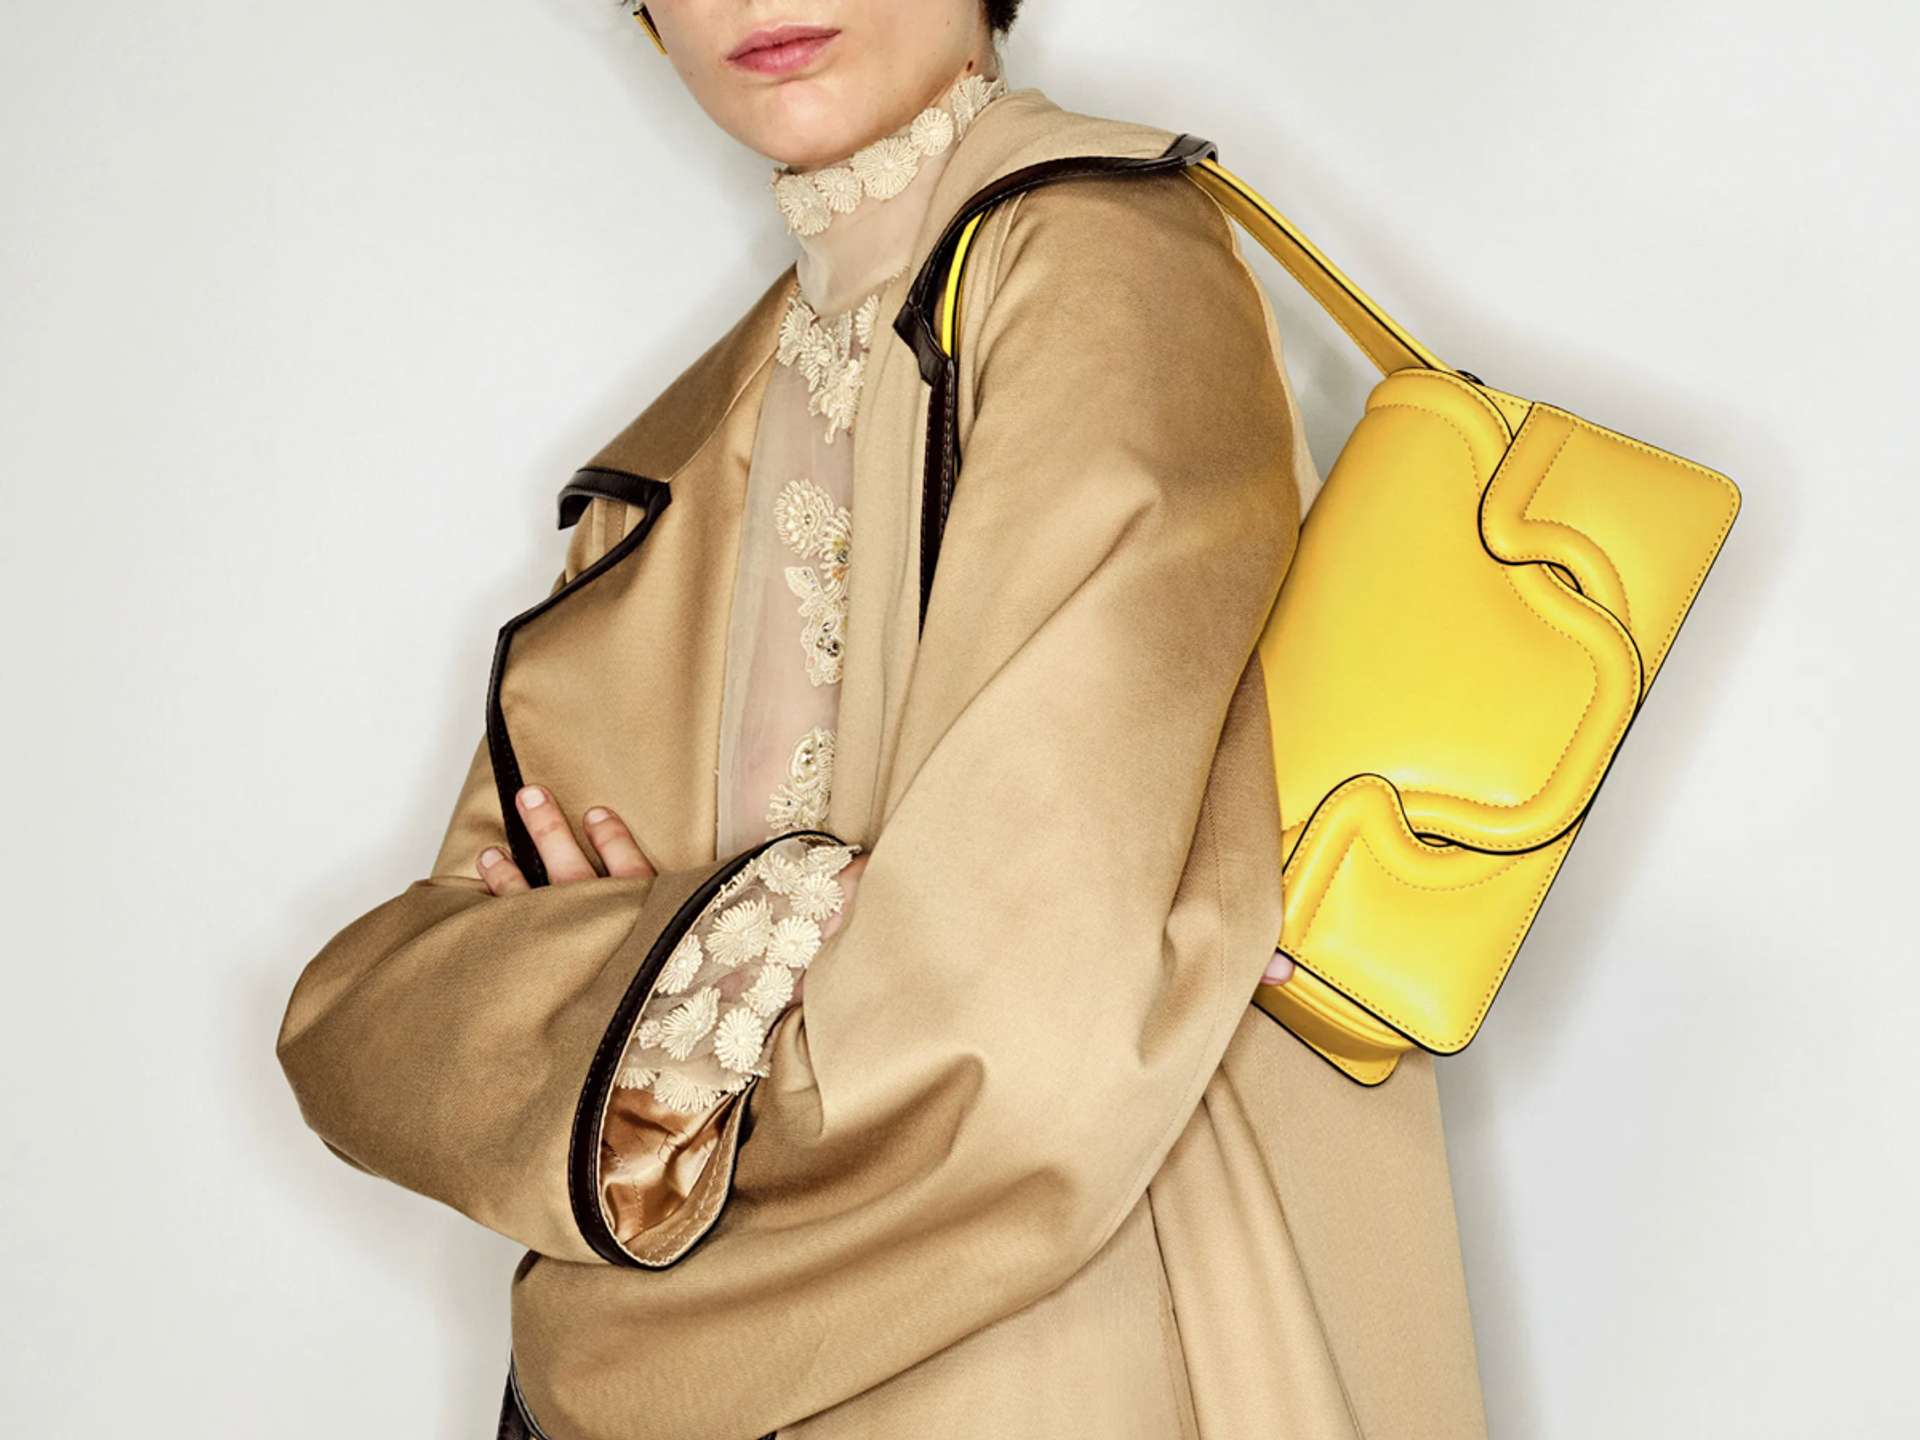 Woman wearing a camel trench coat and bright yellow shoulder bag over her shoulder